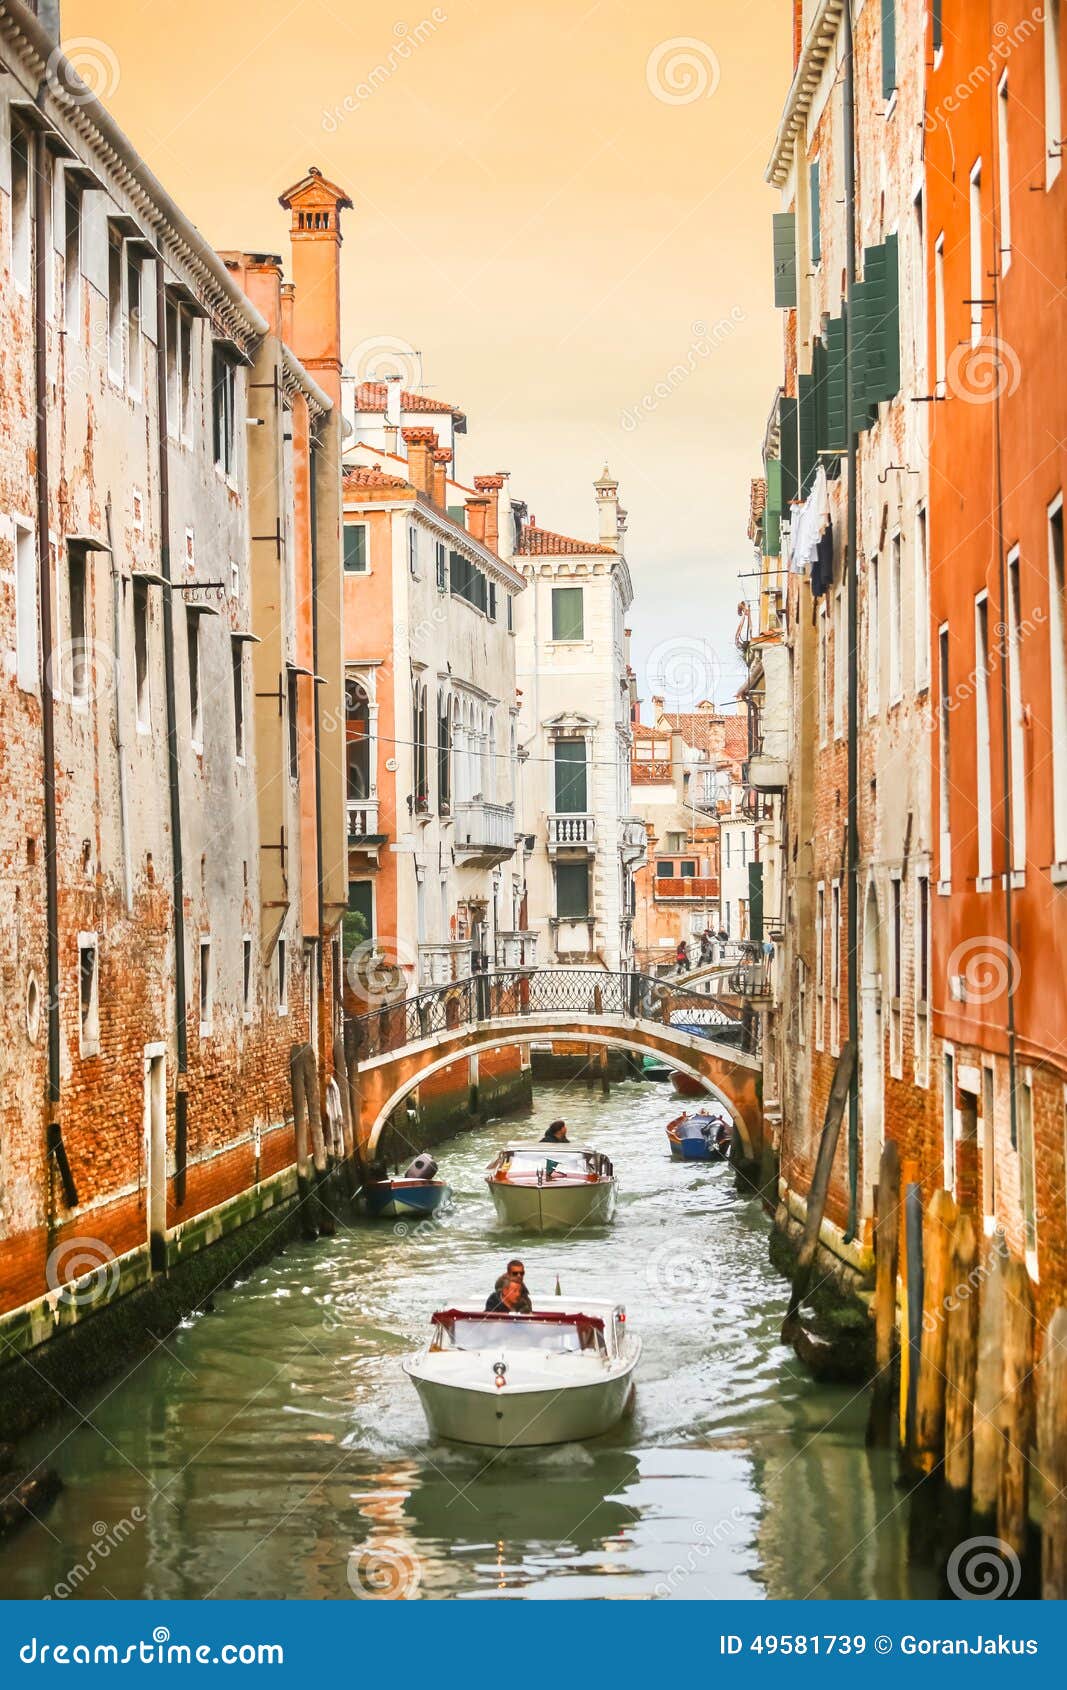 Boats Sailing in Water Canal with Orange Buildings Editorial Stock ...